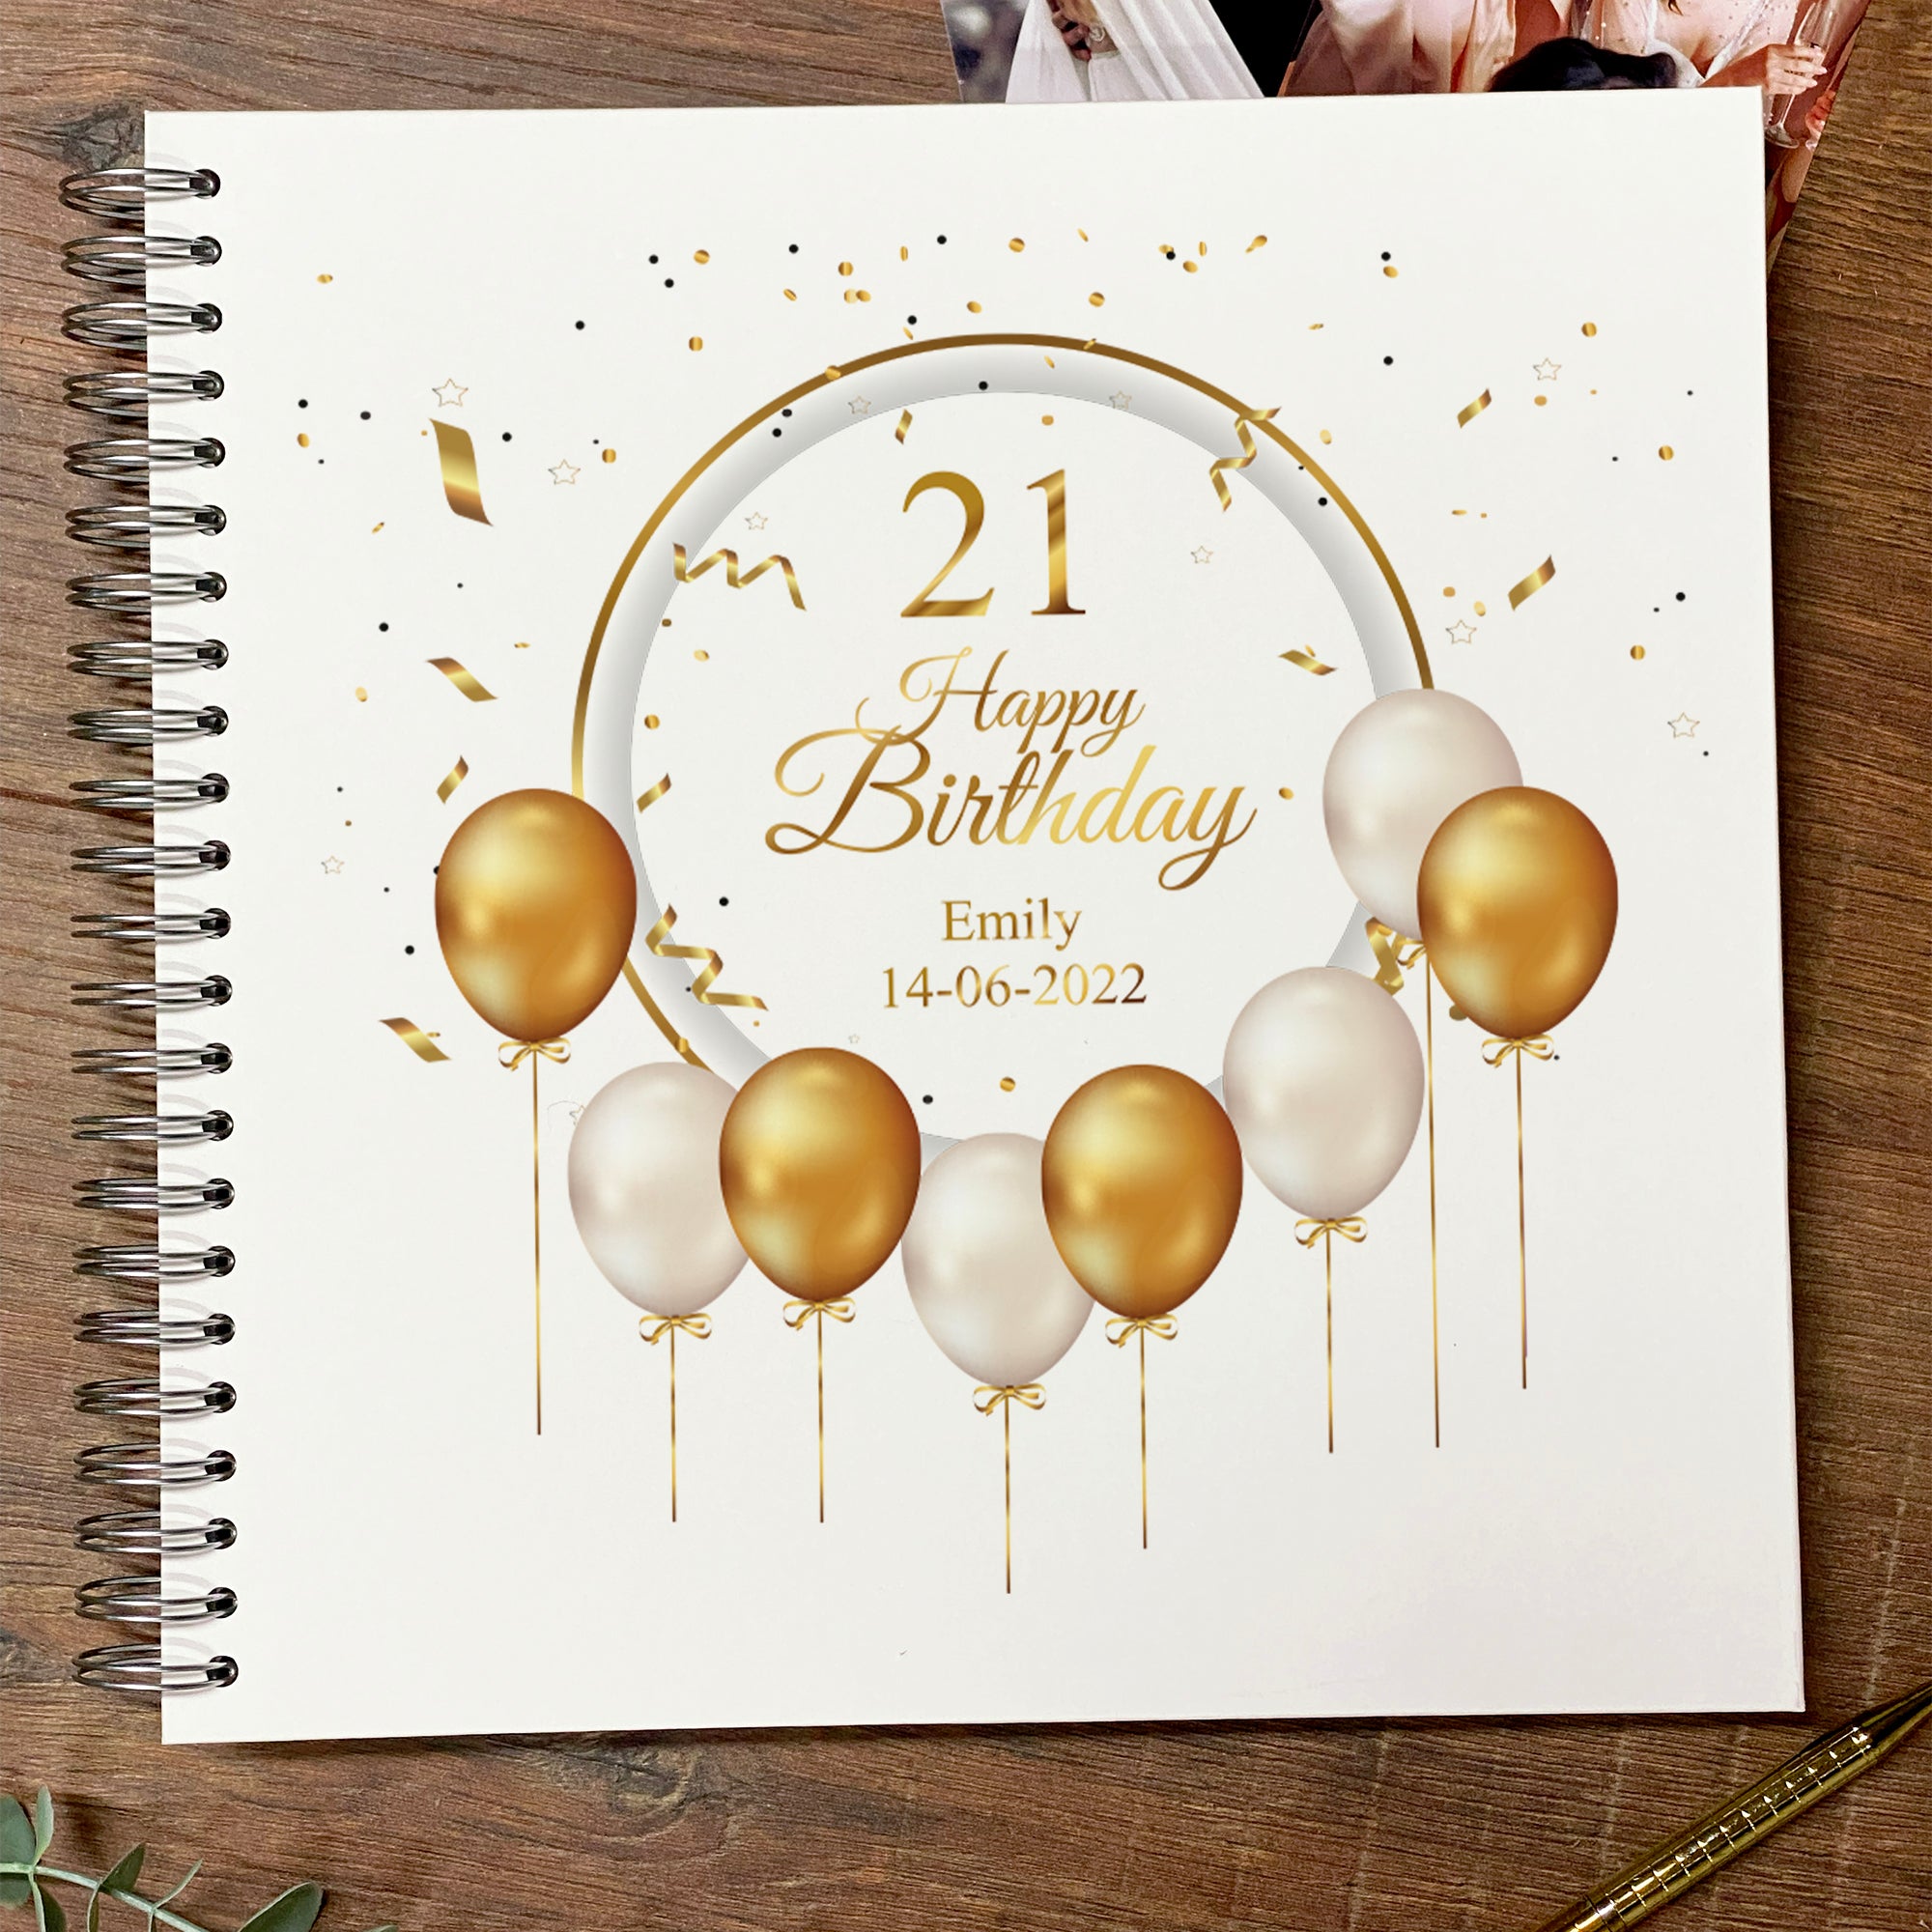 Large Birthday Photo Album Scrapbook Memories Book Boxed Gift Any Age Gold Balloon Design